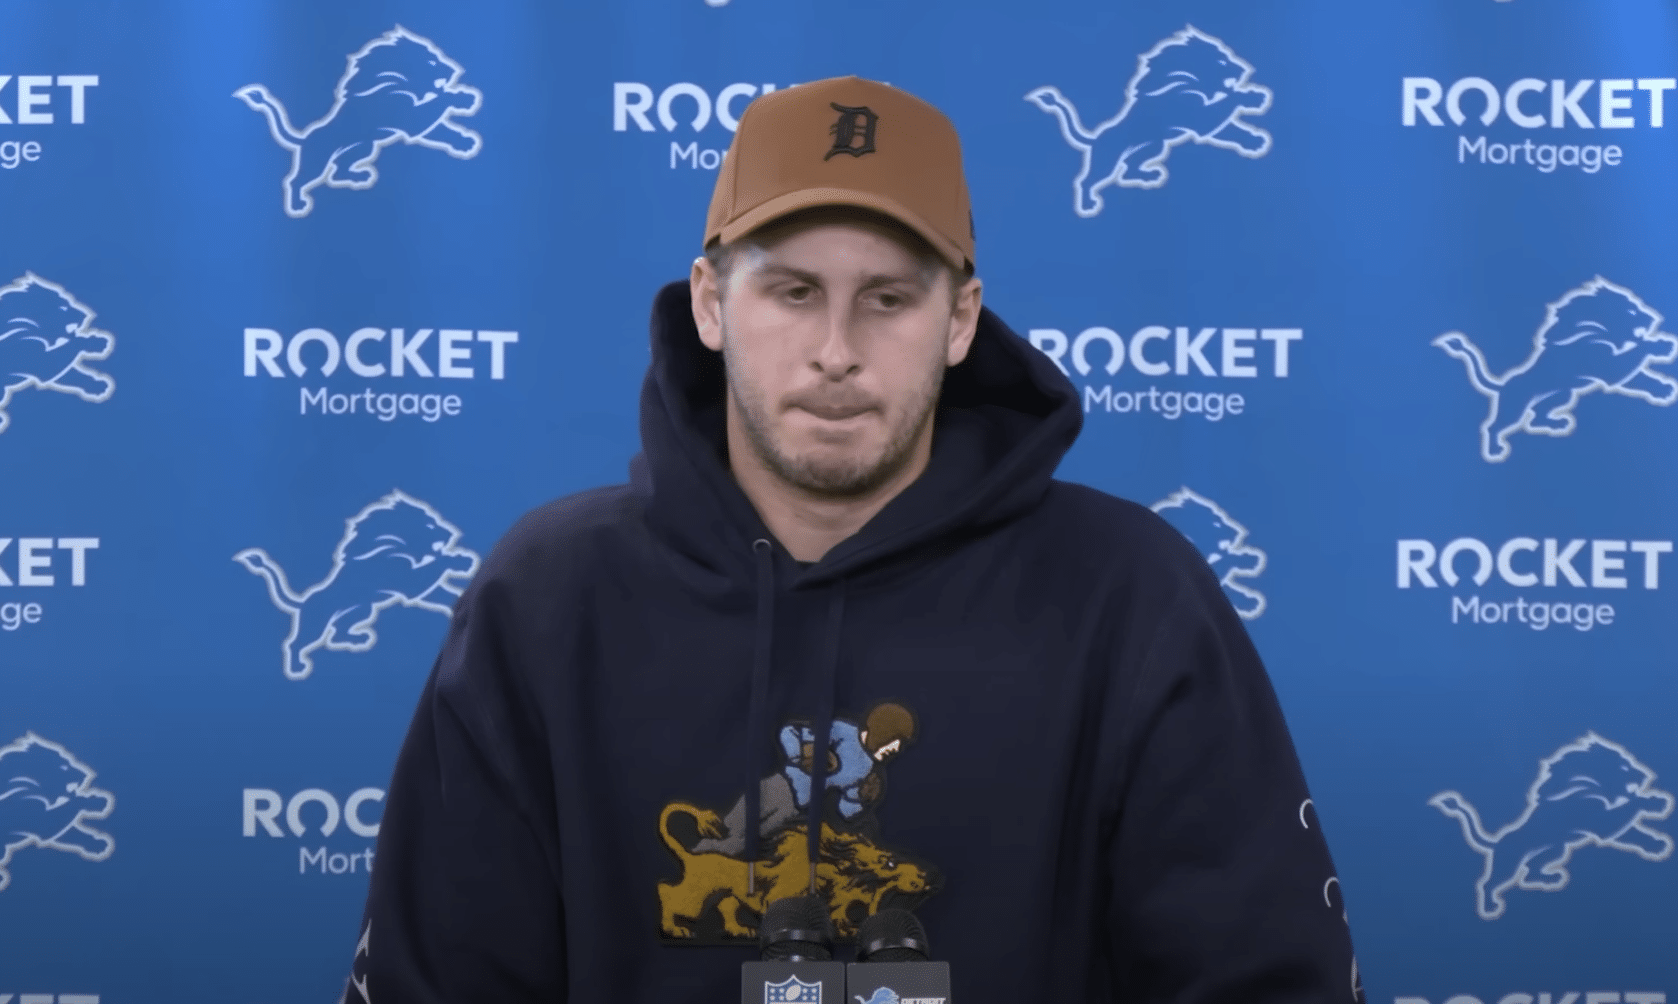 Jared Goff says Detroit LionsJared Goff gets emotional Jared Goff says Detroit Lions Jared Goff responds to question Jared Goff could break NFL record